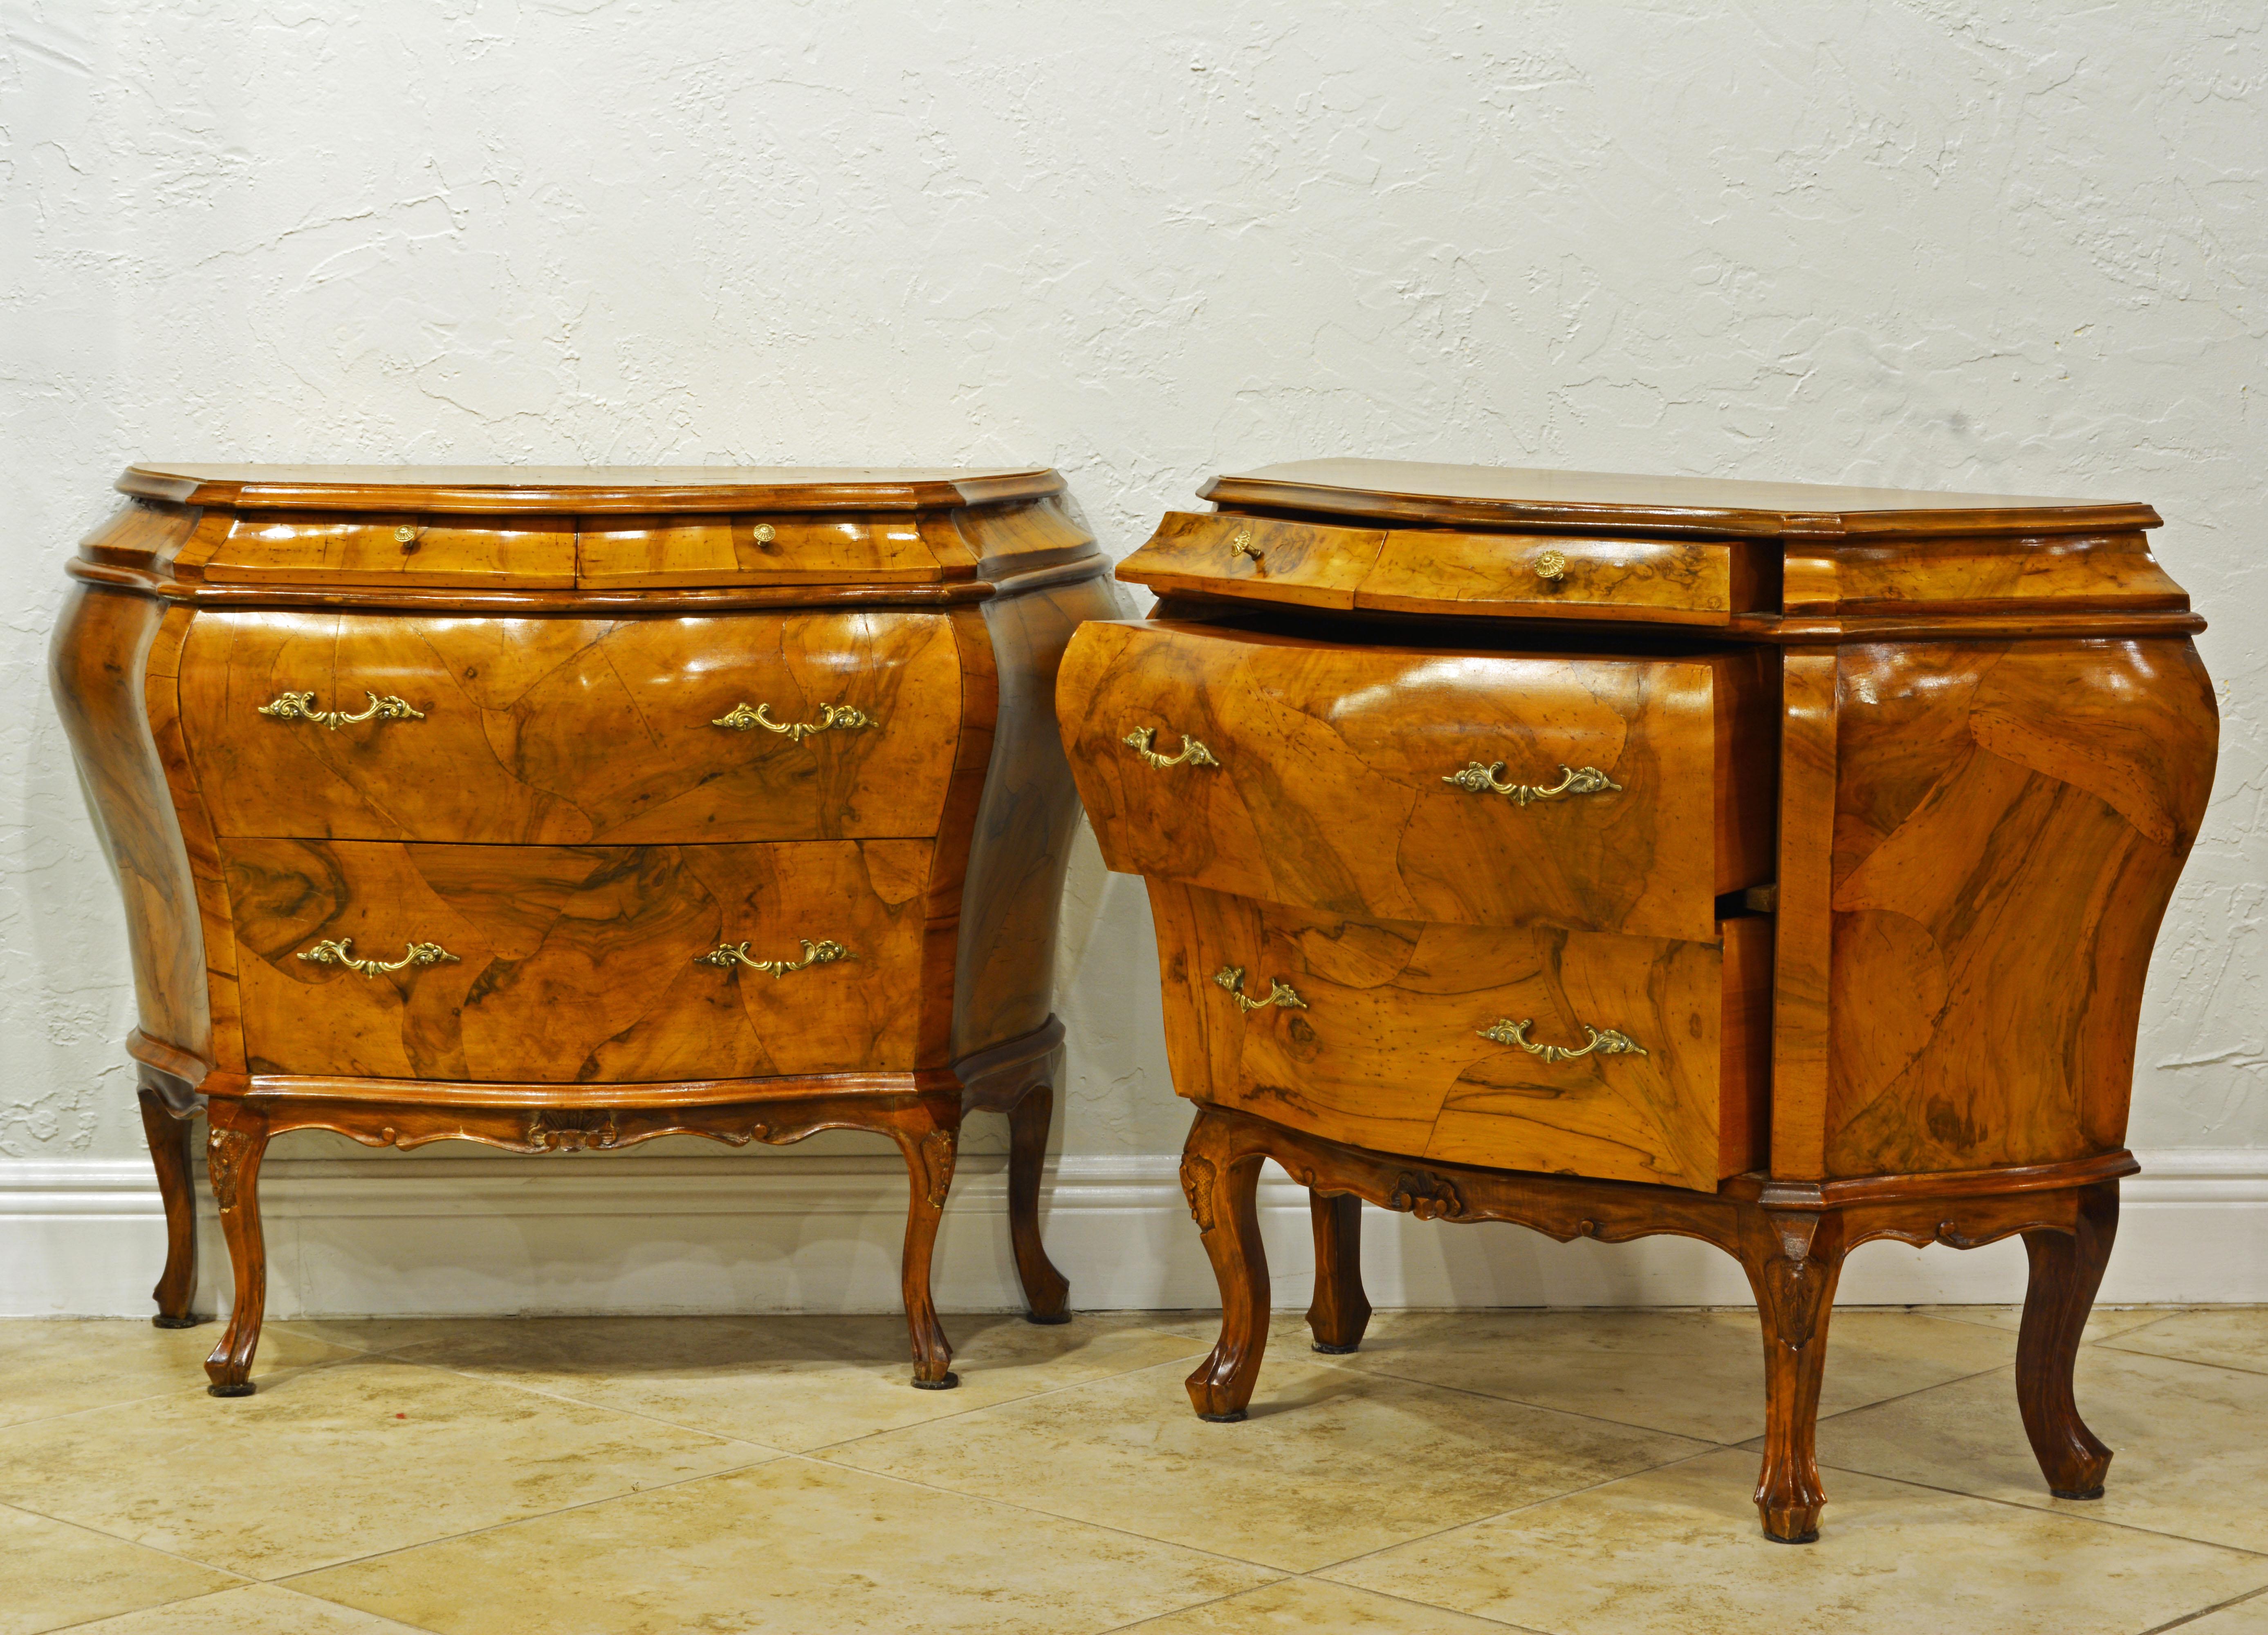 Veneer Pair of Charming Italian Rococo Style Carved Olive Wood Bombe Commodes